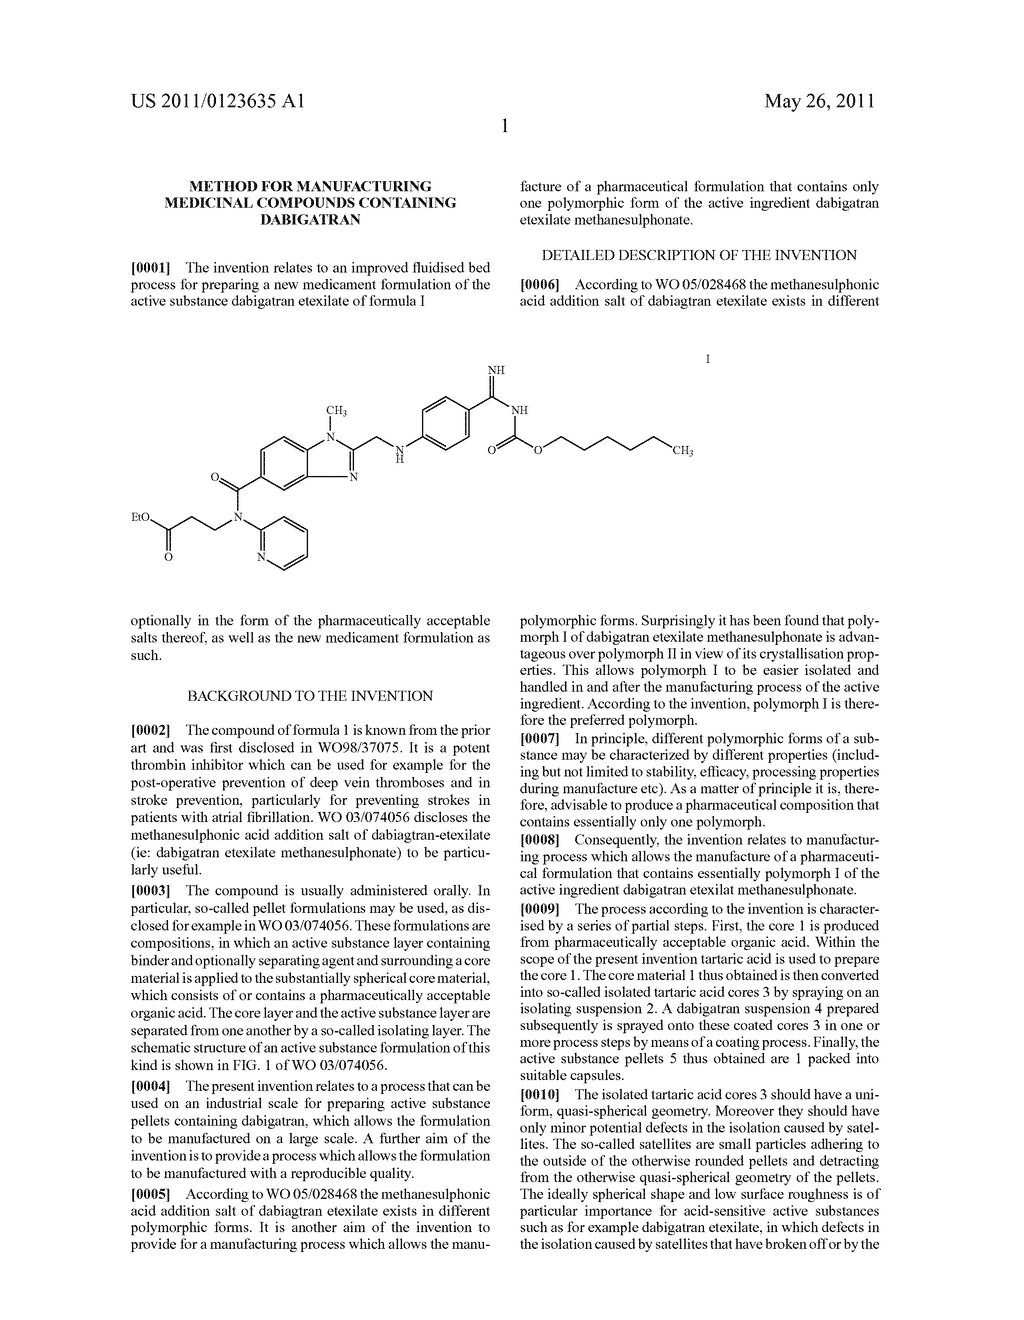 METHOD FOR MANUFACTURING MEDICINAL COMPOUNDS CONTAINING DABIGATRAN - diagram, schematic, and image 02